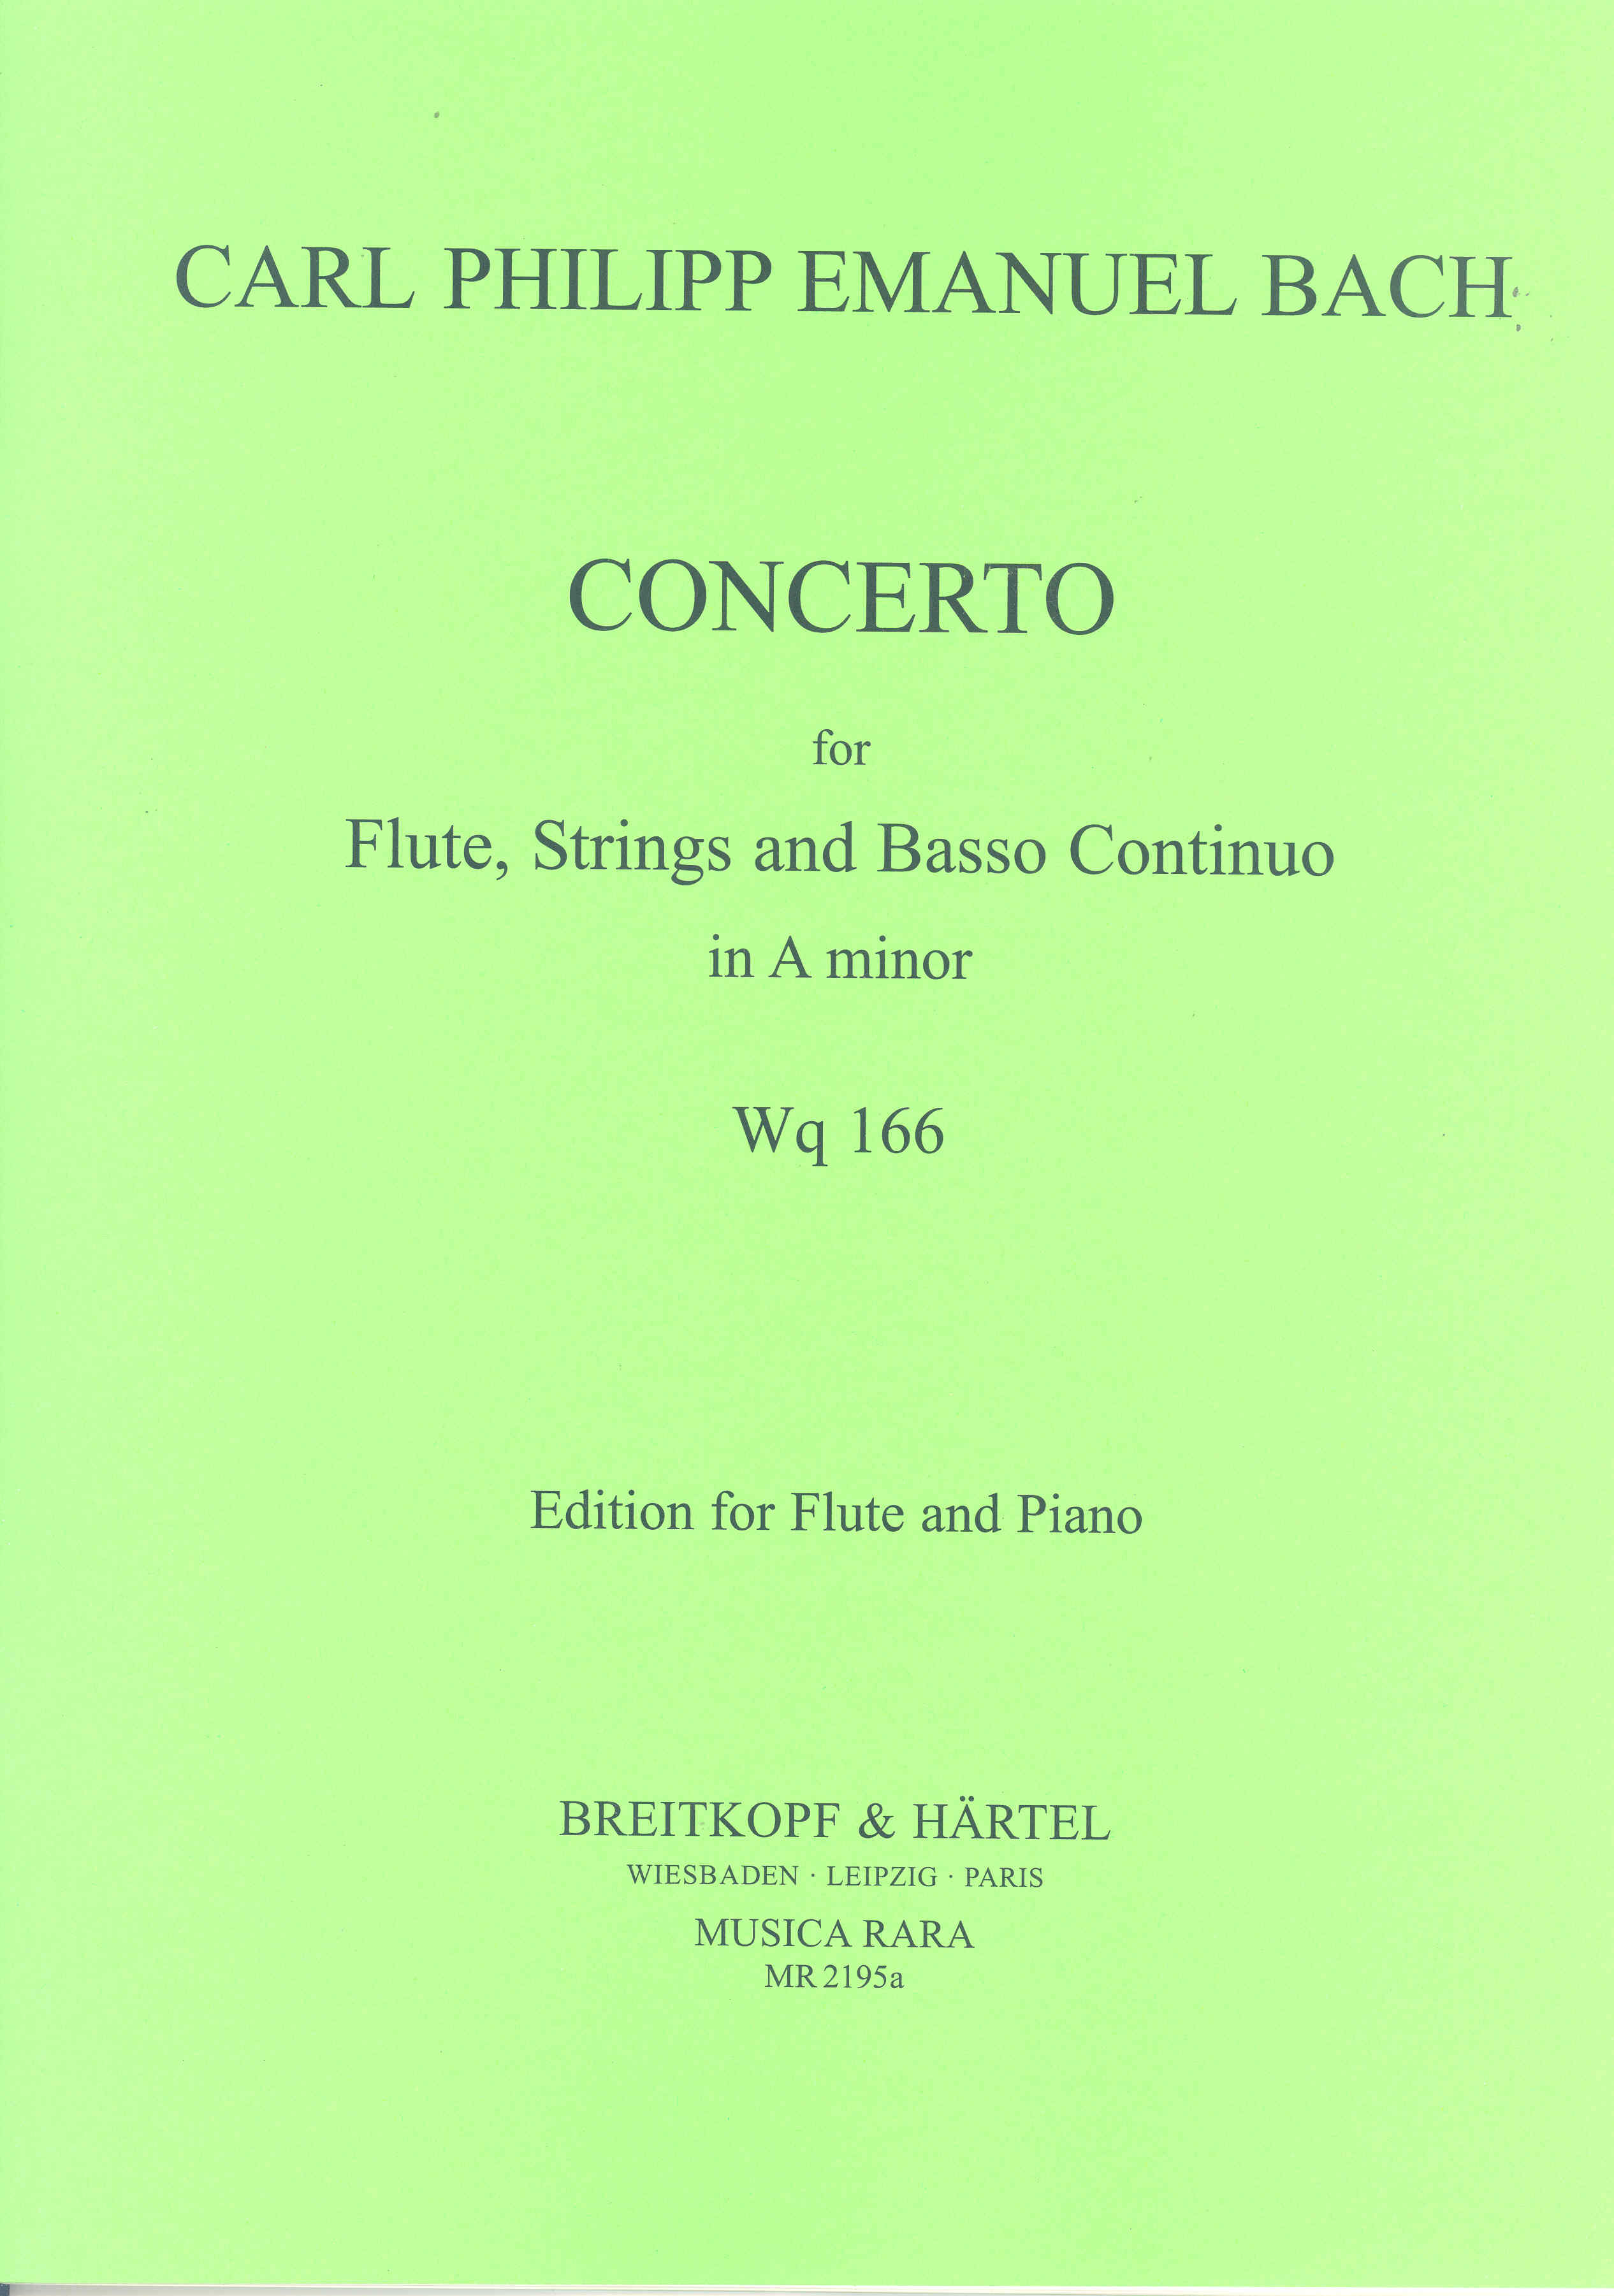 Bach Cpe Flute Concerto A Minor Wq166 Flute & Pft Sheet Music Songbook